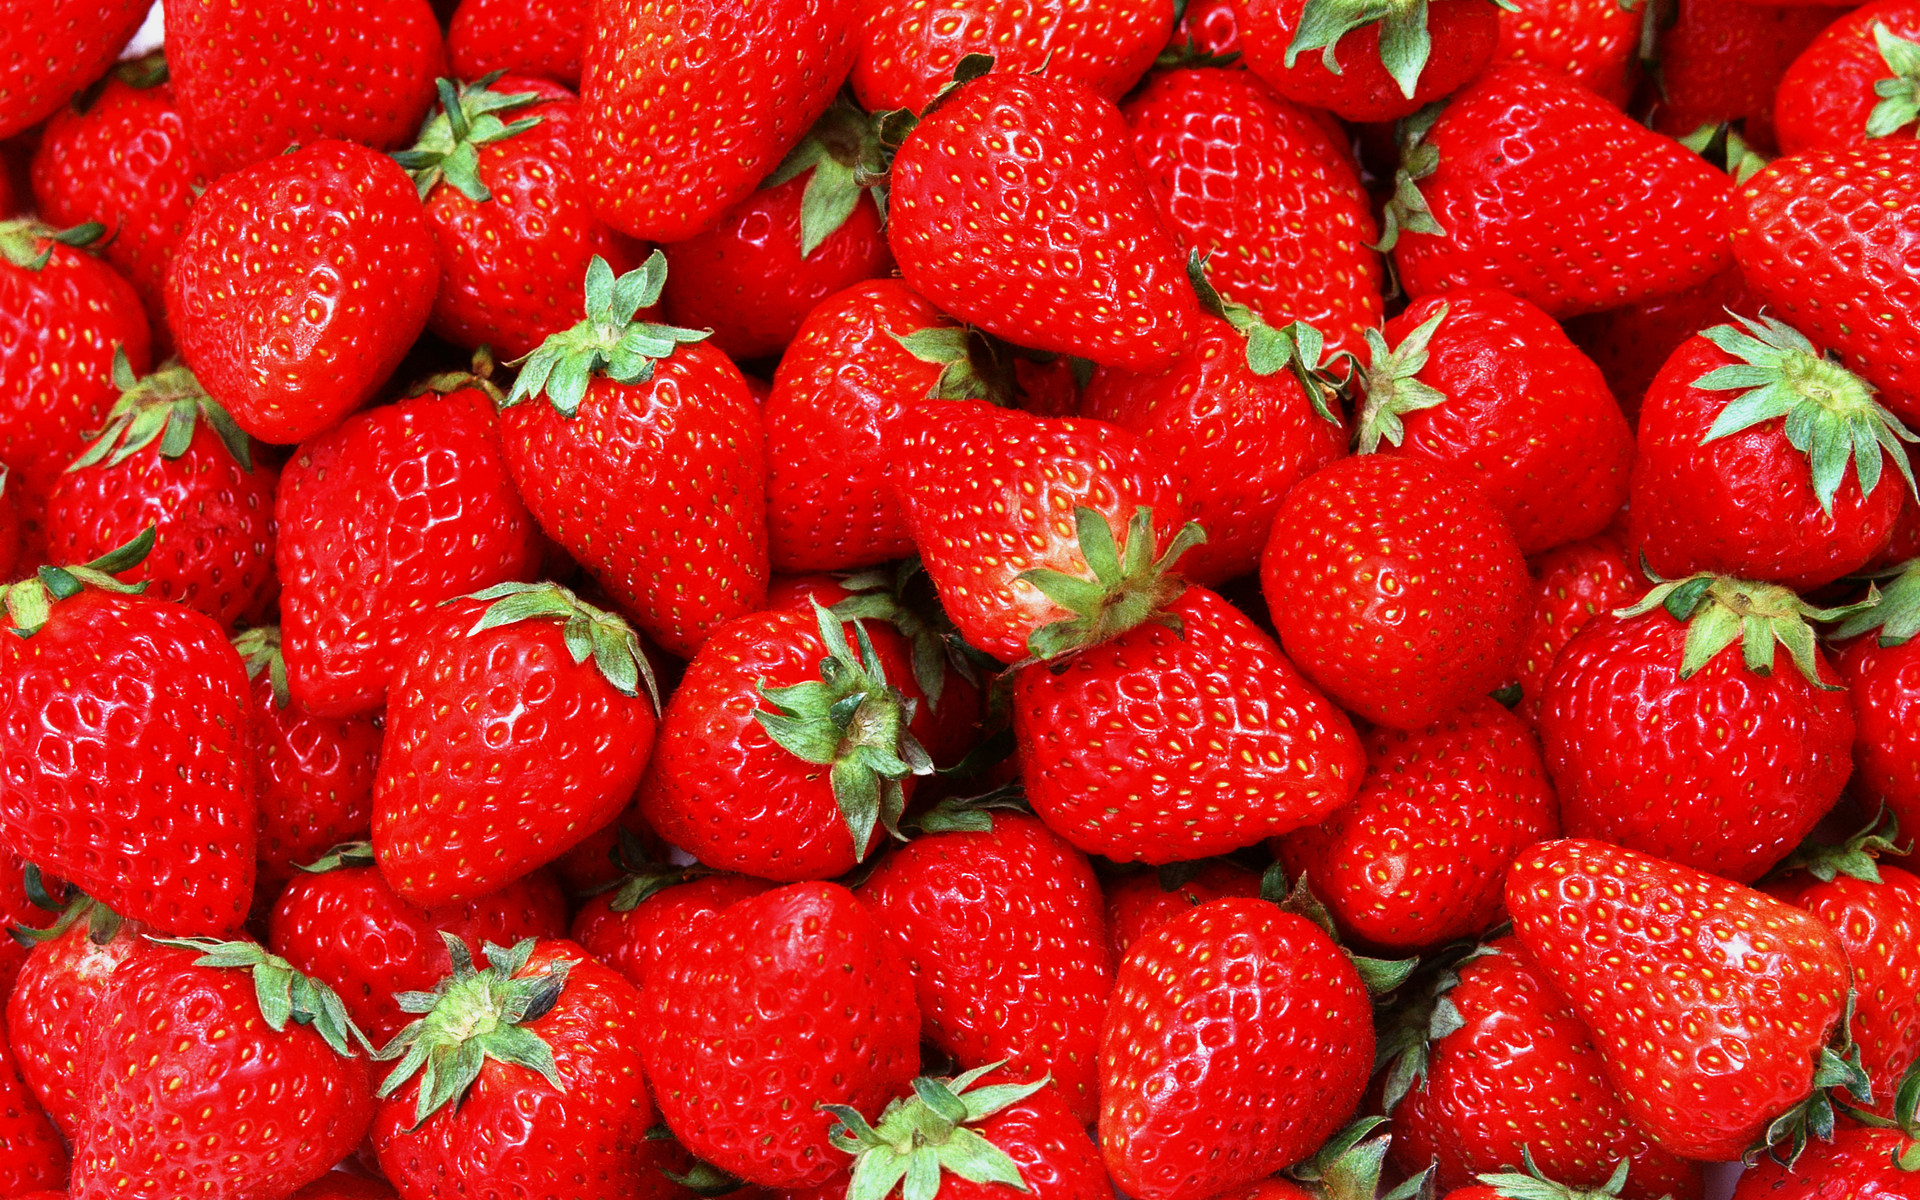 Strawberry Backgrounds